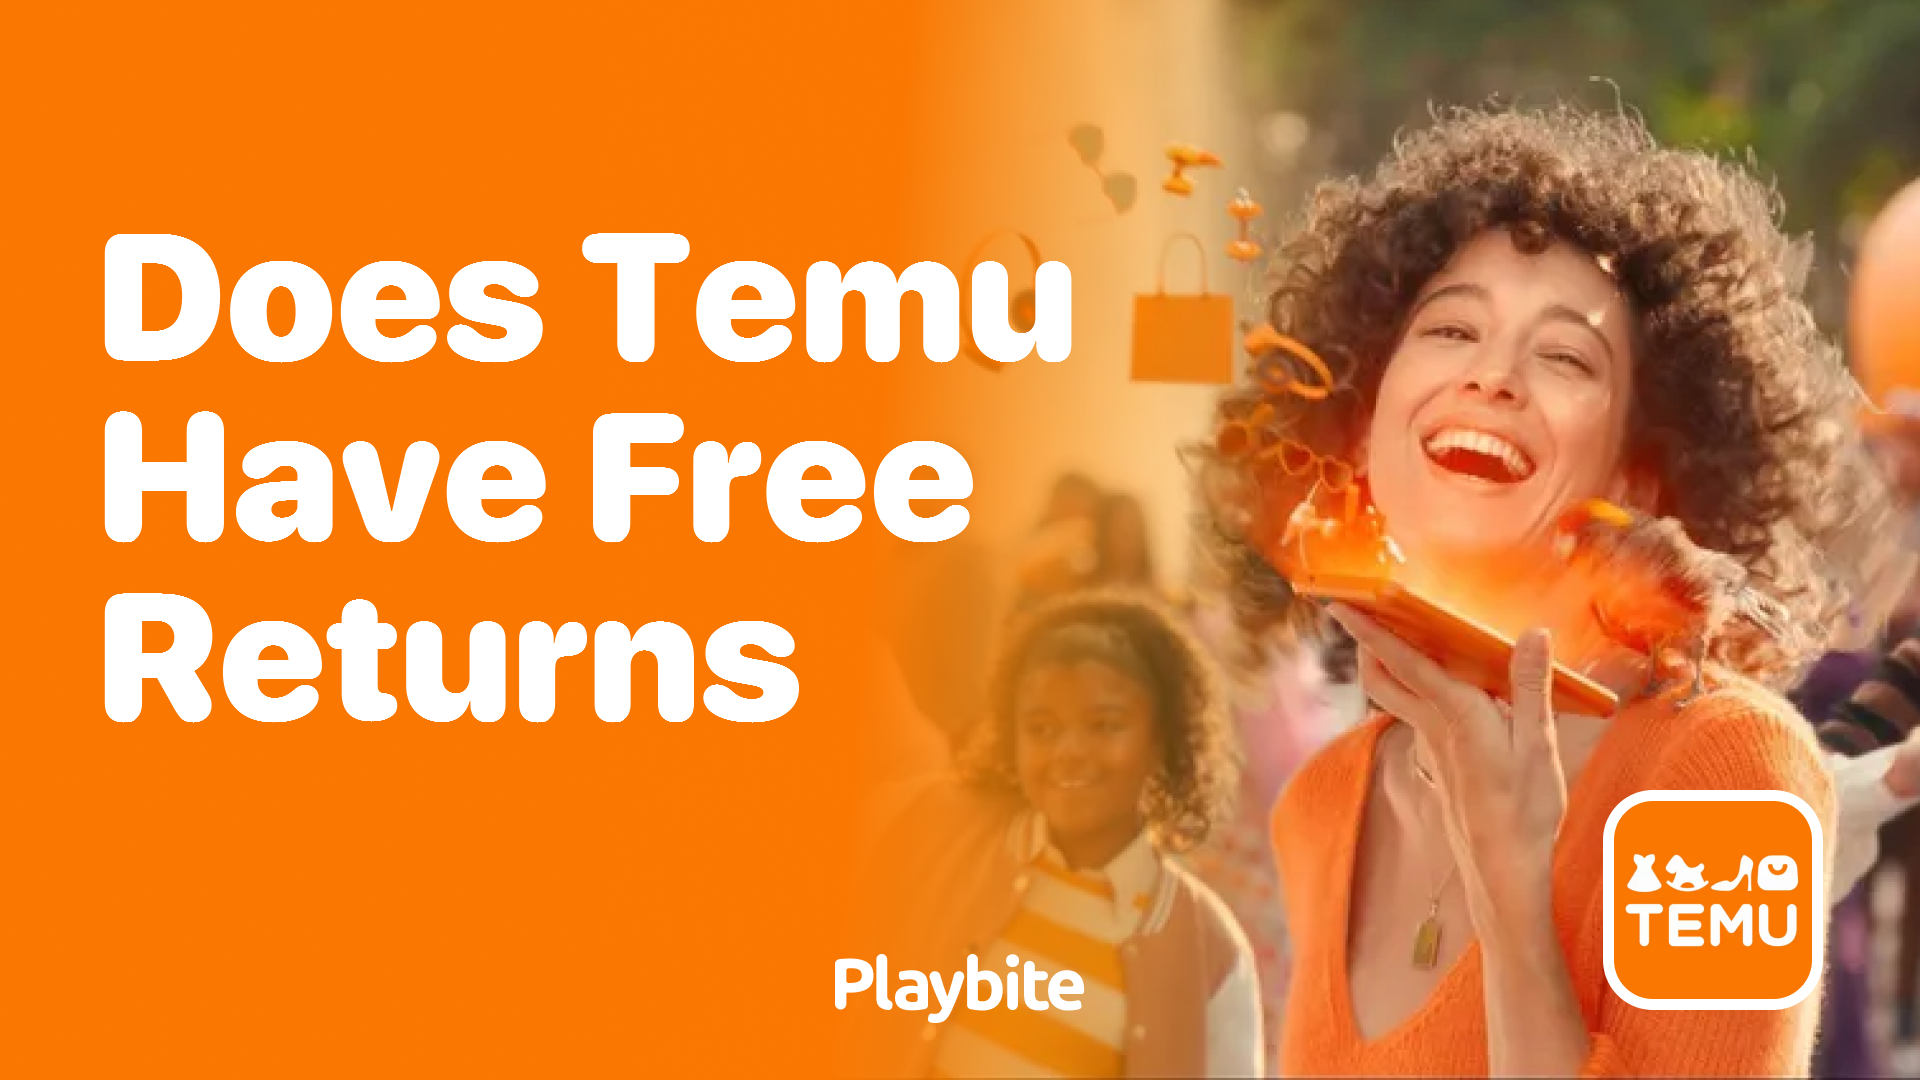 Does Temu Offer Free Returns? Find Out Here!